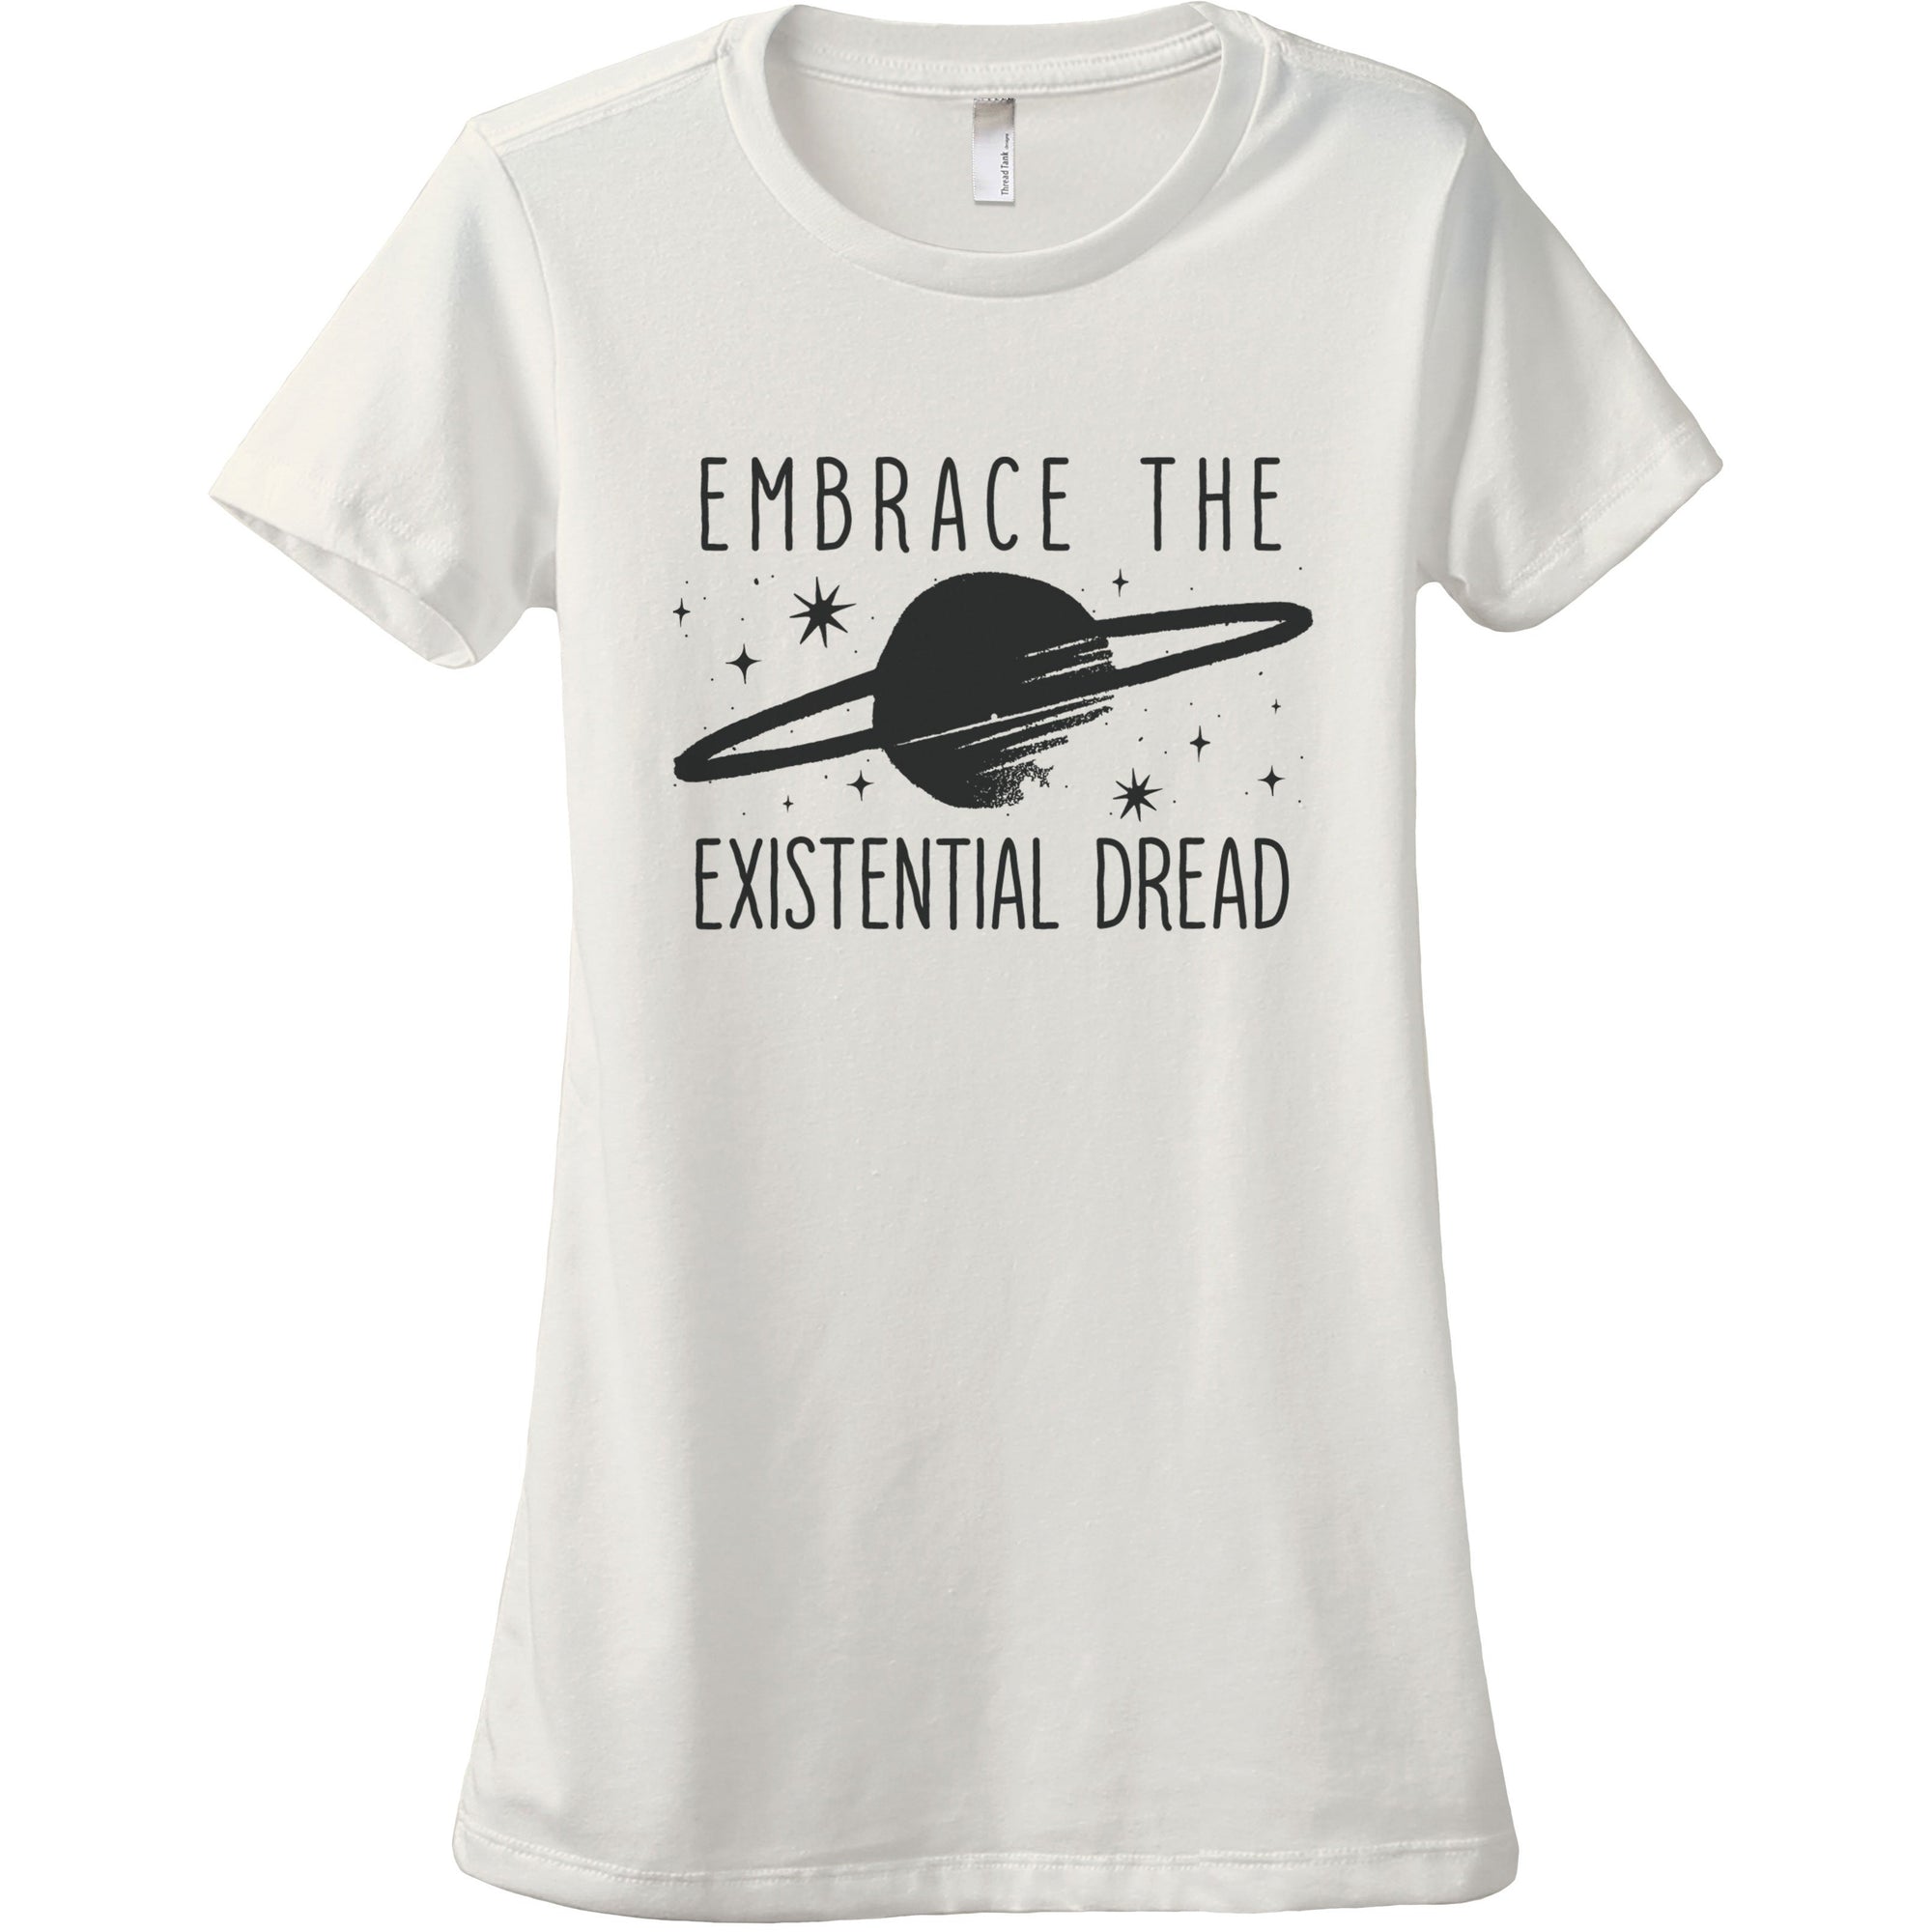 4. Embrace The Existential Dread - Stories You Can Wear by Thread Tank